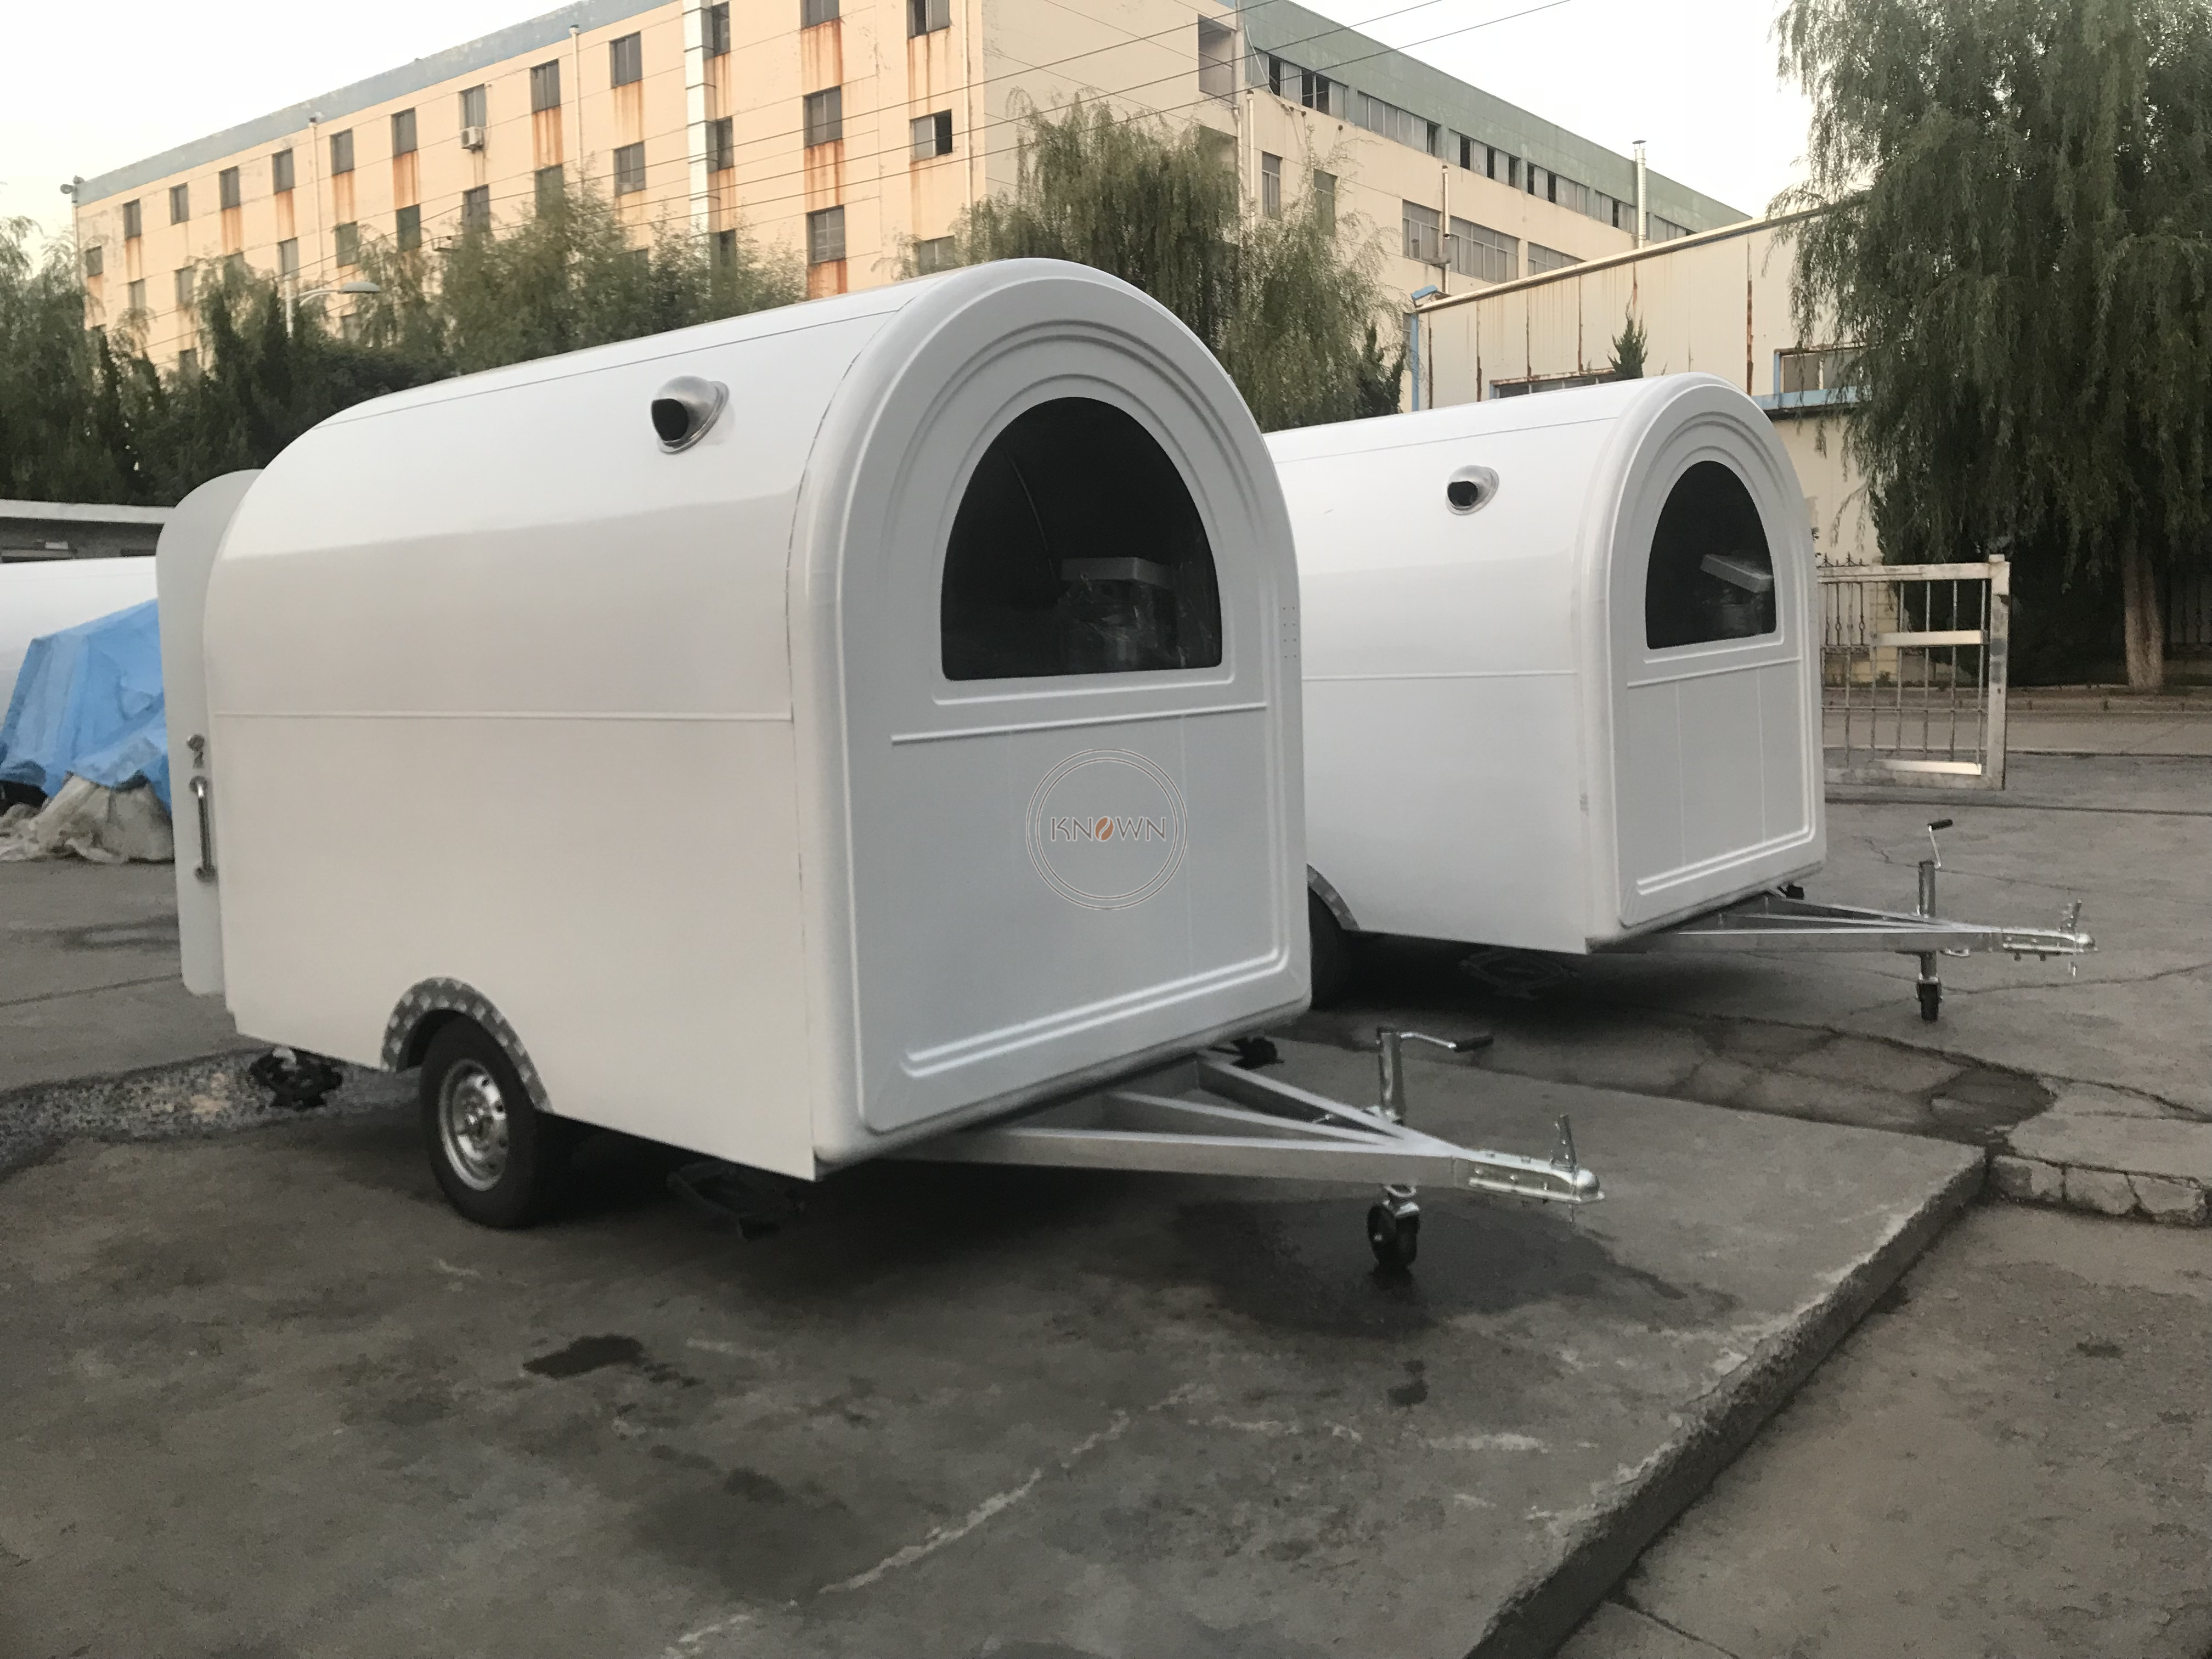 Hot Dog Mobile 280*160*210 cm Food Trailer Outdoor Food Cart Good Quality Hot Selling